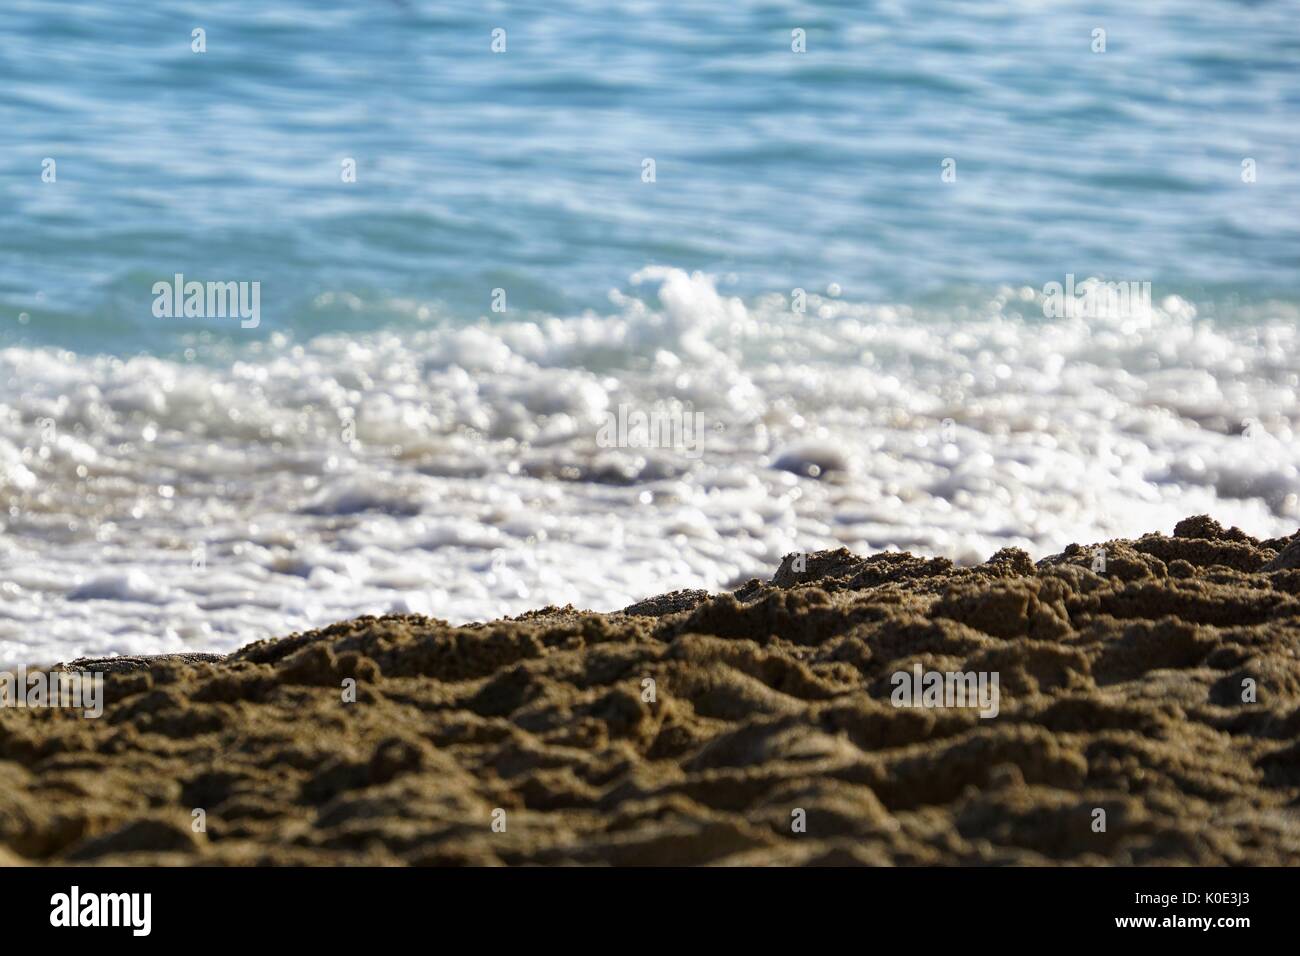 beach / seafront - blue sea, breaking wave, white water and sand Stock Photo